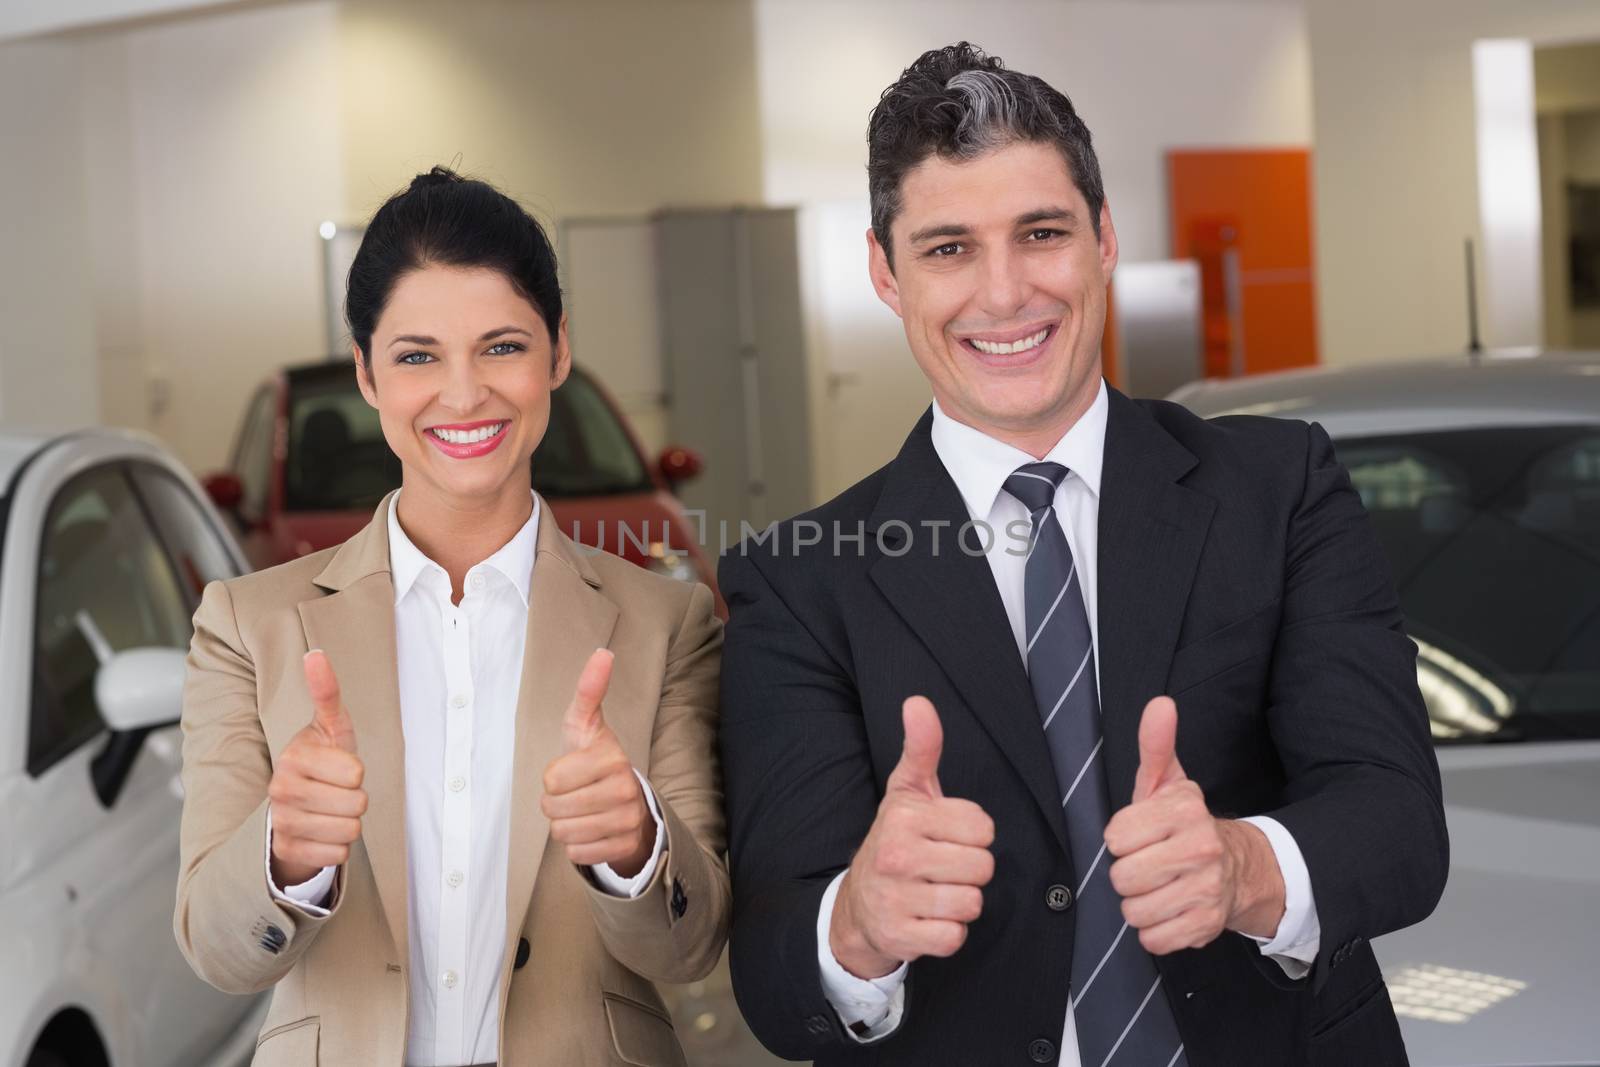 Business team giving thumbs up by Wavebreakmedia